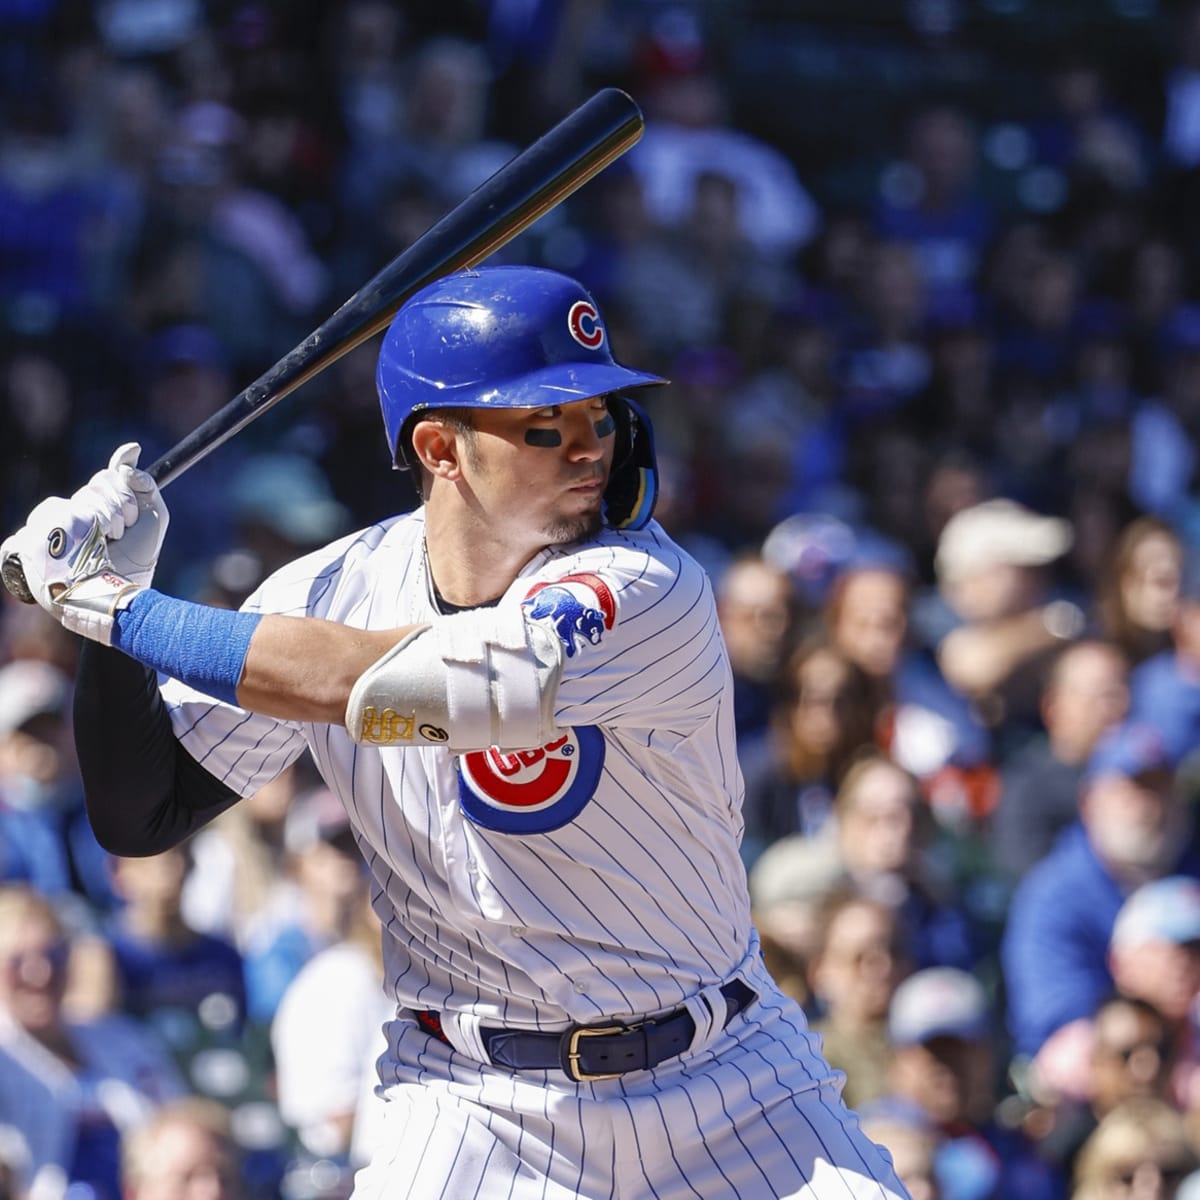 Chicago Cubs' 2023 Projected Starting Lineup After Signing Tucker Barnhart  - Fastball